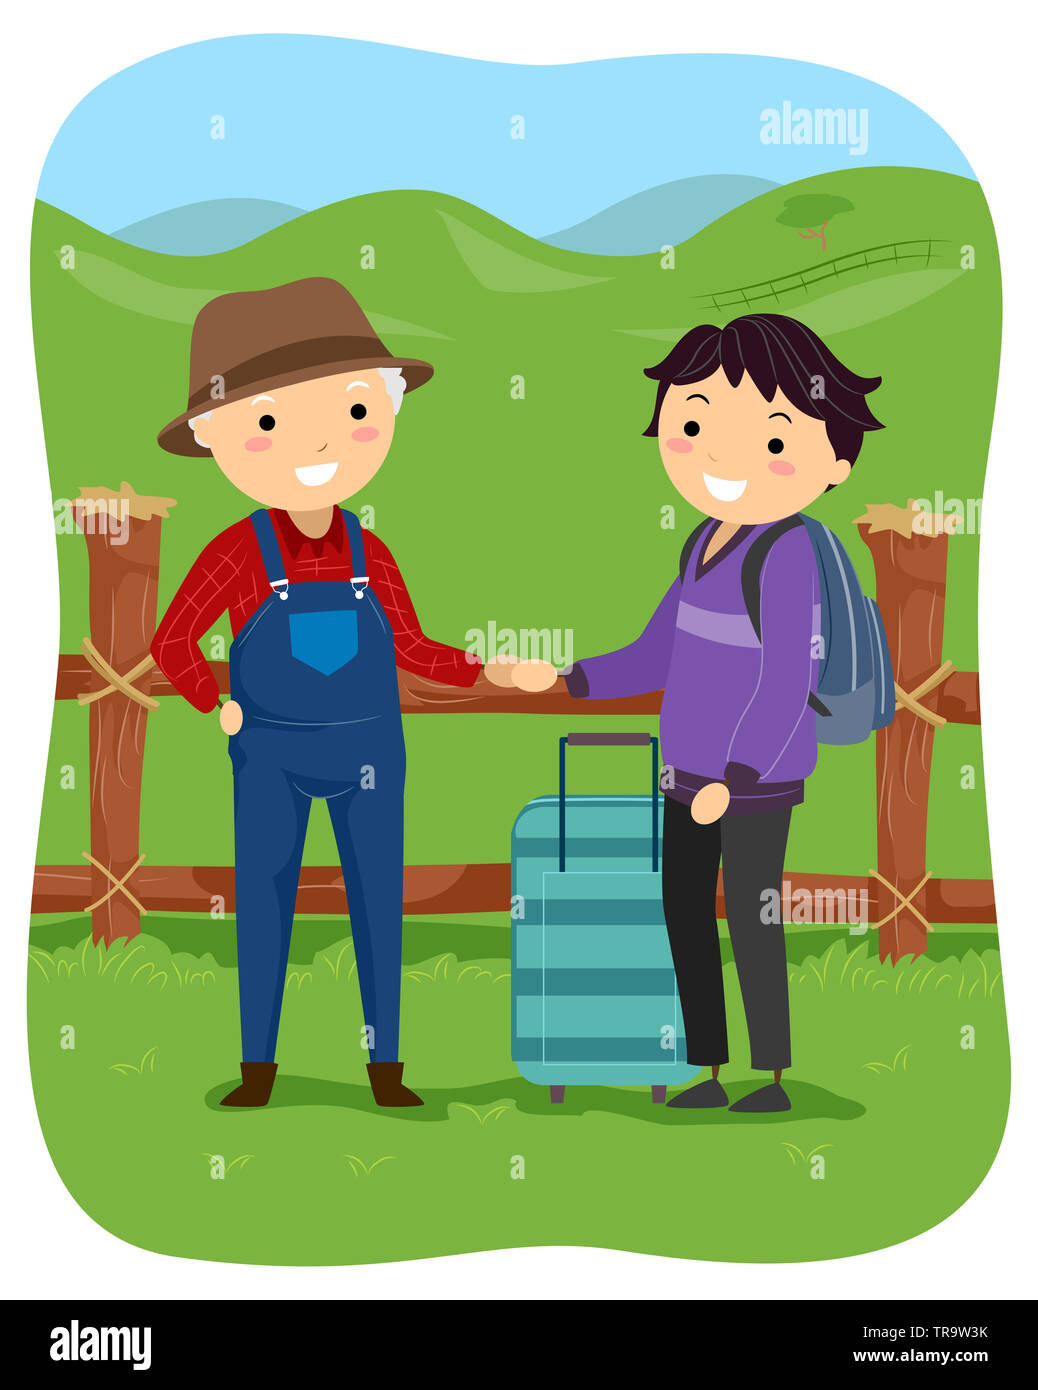 Illustration of a Senior Man Farmer Greeting a Volunteer Young Man to Help in his Farm Stock Photo